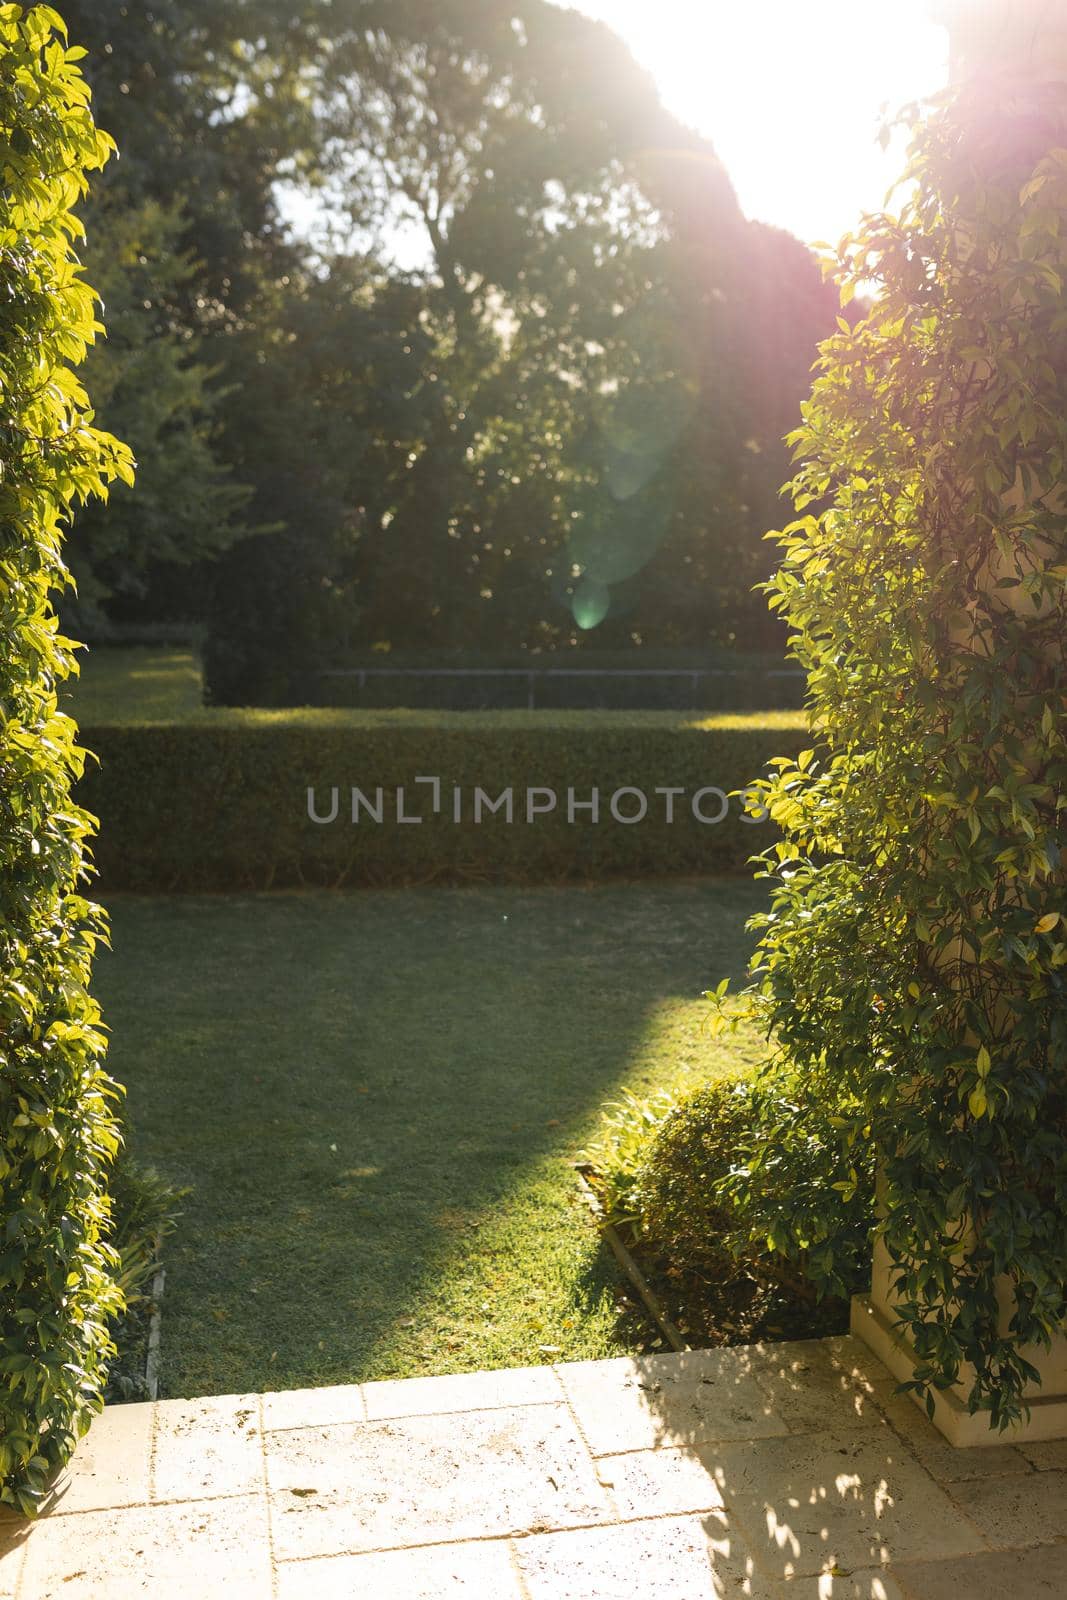 General view of trees and plants in stunning summer garden by Wavebreakmedia